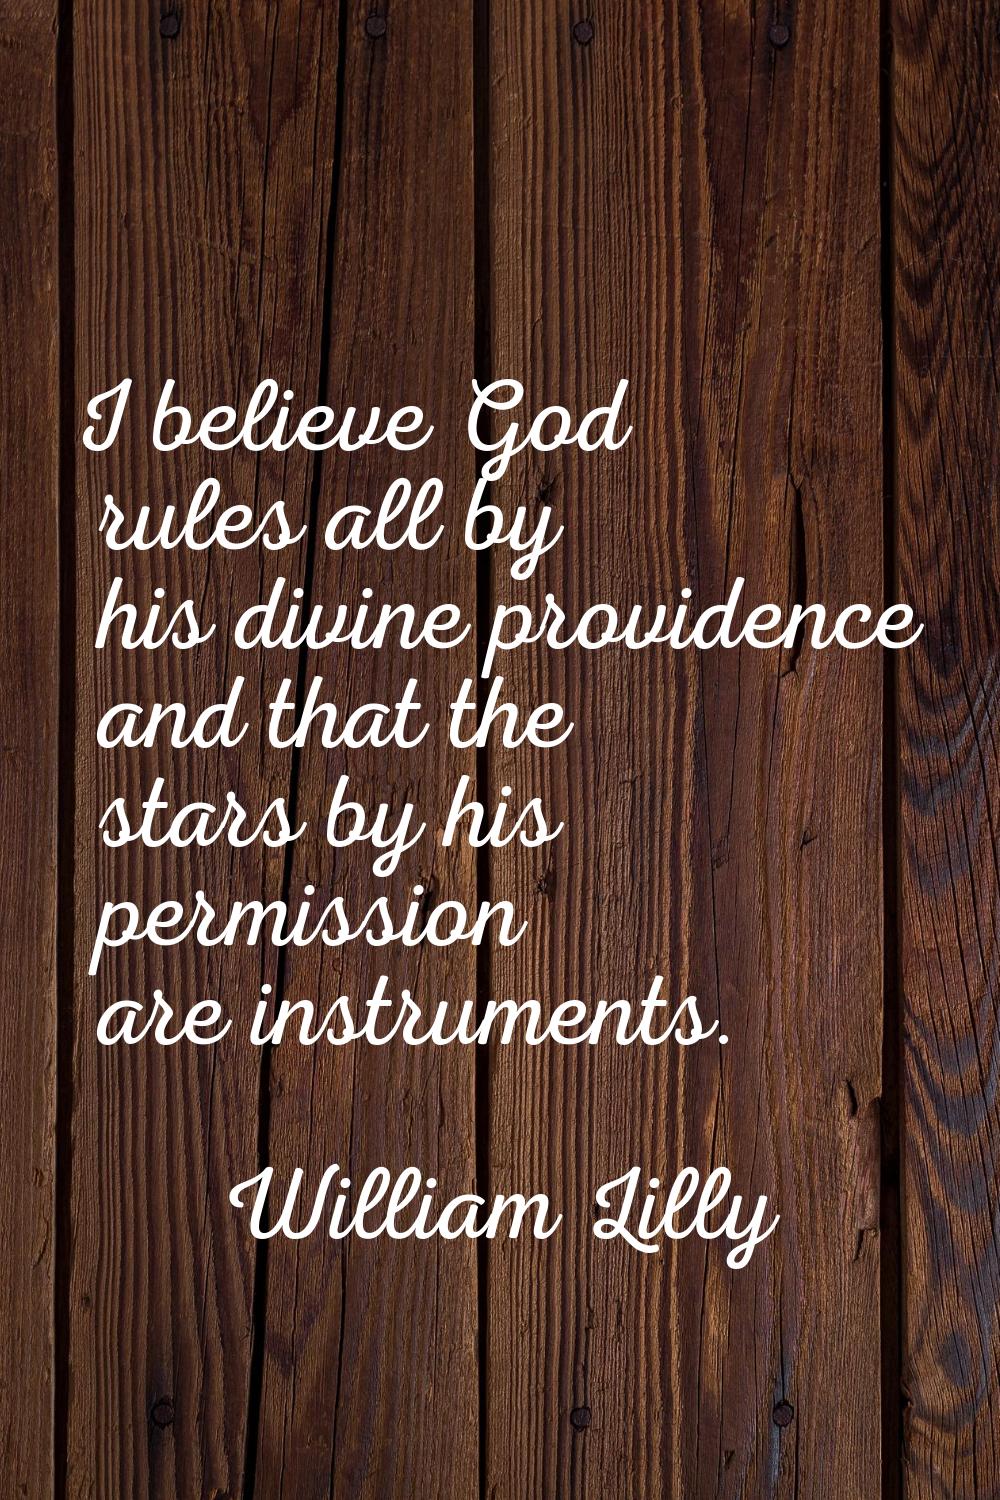 I believe God rules all by his divine providence and that the stars by his permission are instrumen